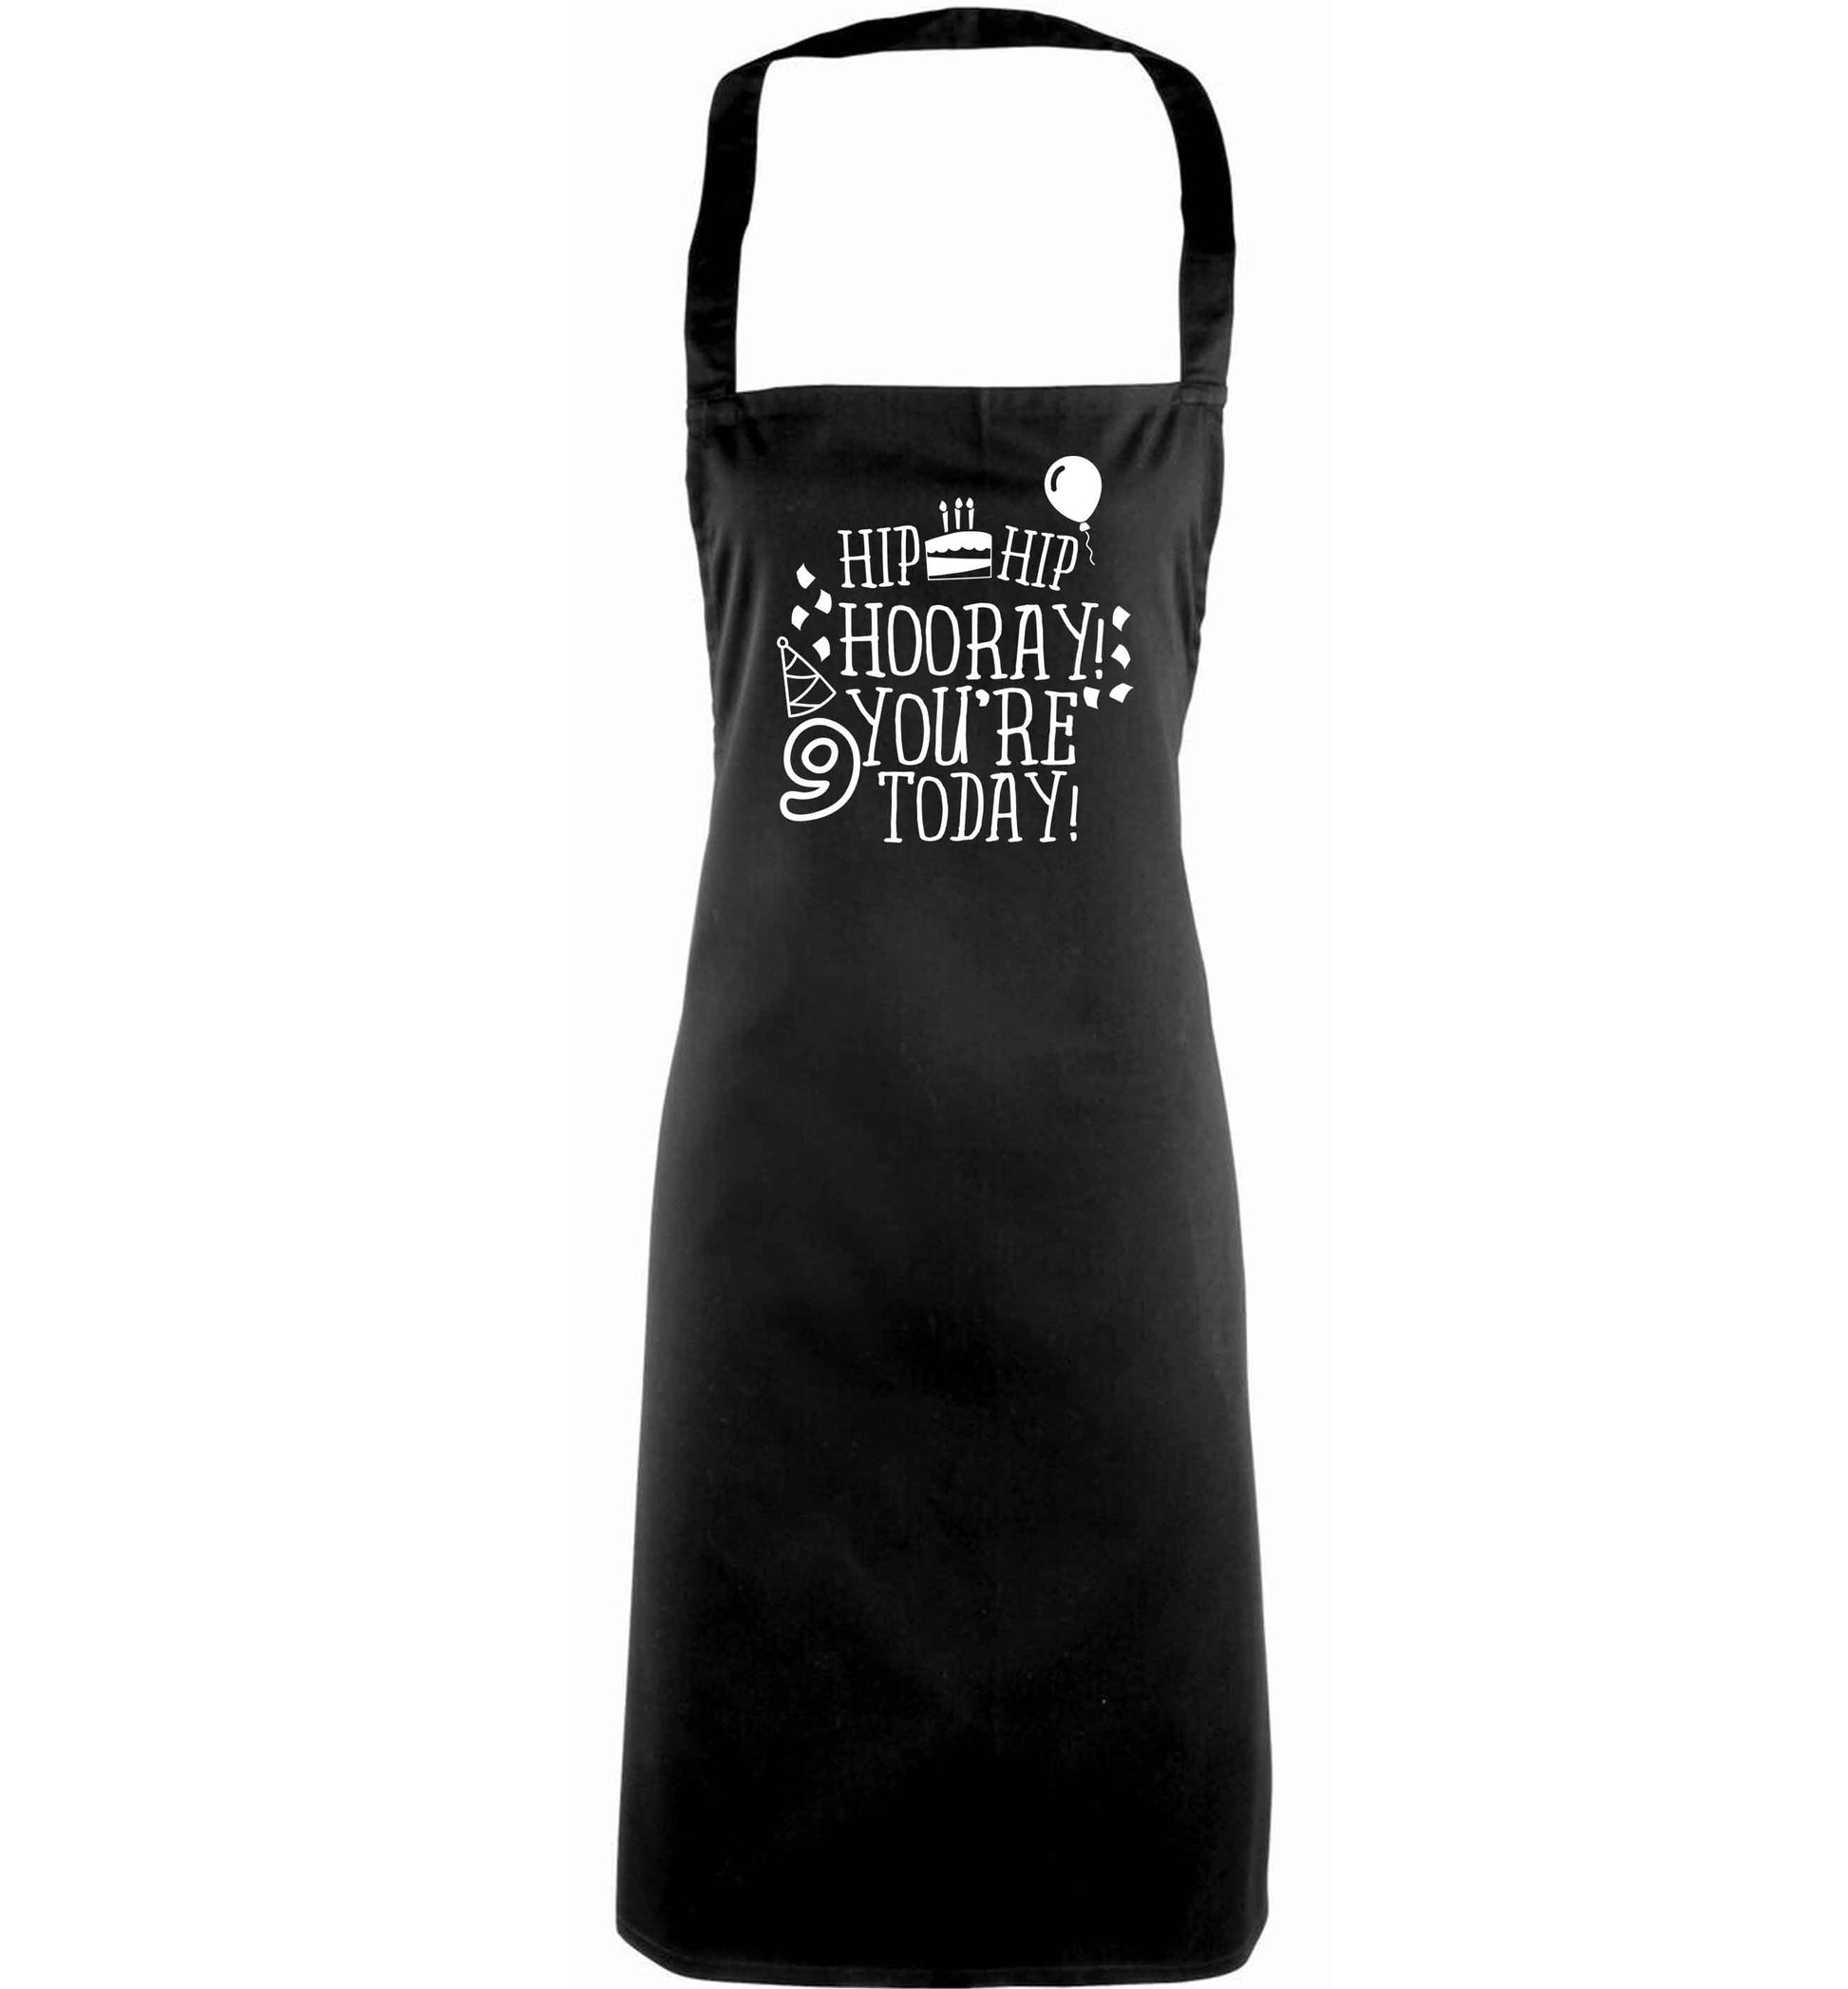 Hip hip hooray you're 9 today! adults black apron